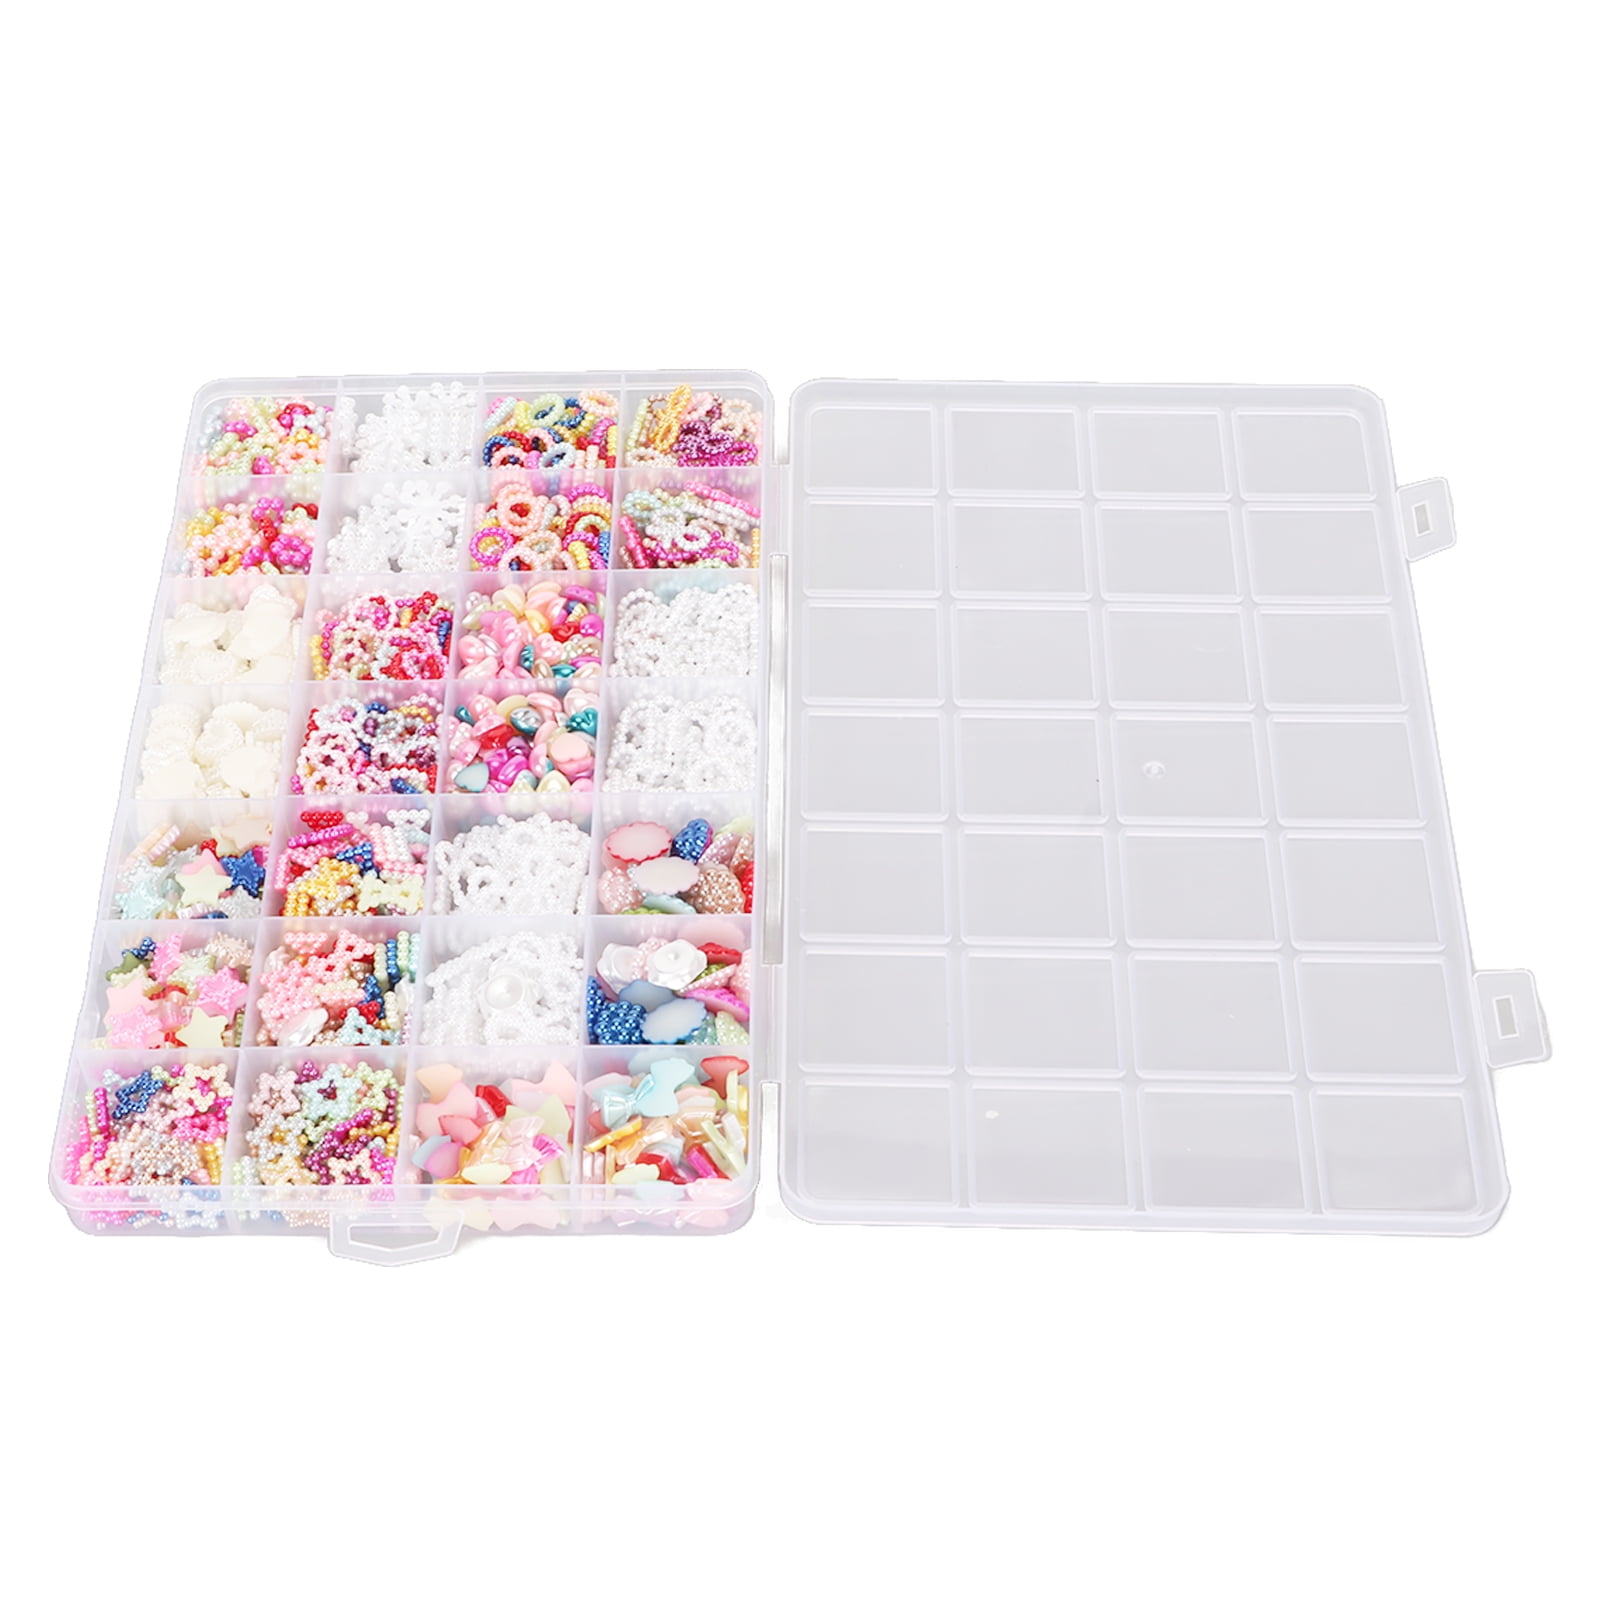 24 Colors 2.6mm Fuse Bead Set 15000-16000Pcs Art Crafting Melting Beads  Puzzle Magic DIY Art Craft Toys Refill Beads with Storage Case Pegboards  Patterns Tweezers Ironing Paper for Making DIY Art and 